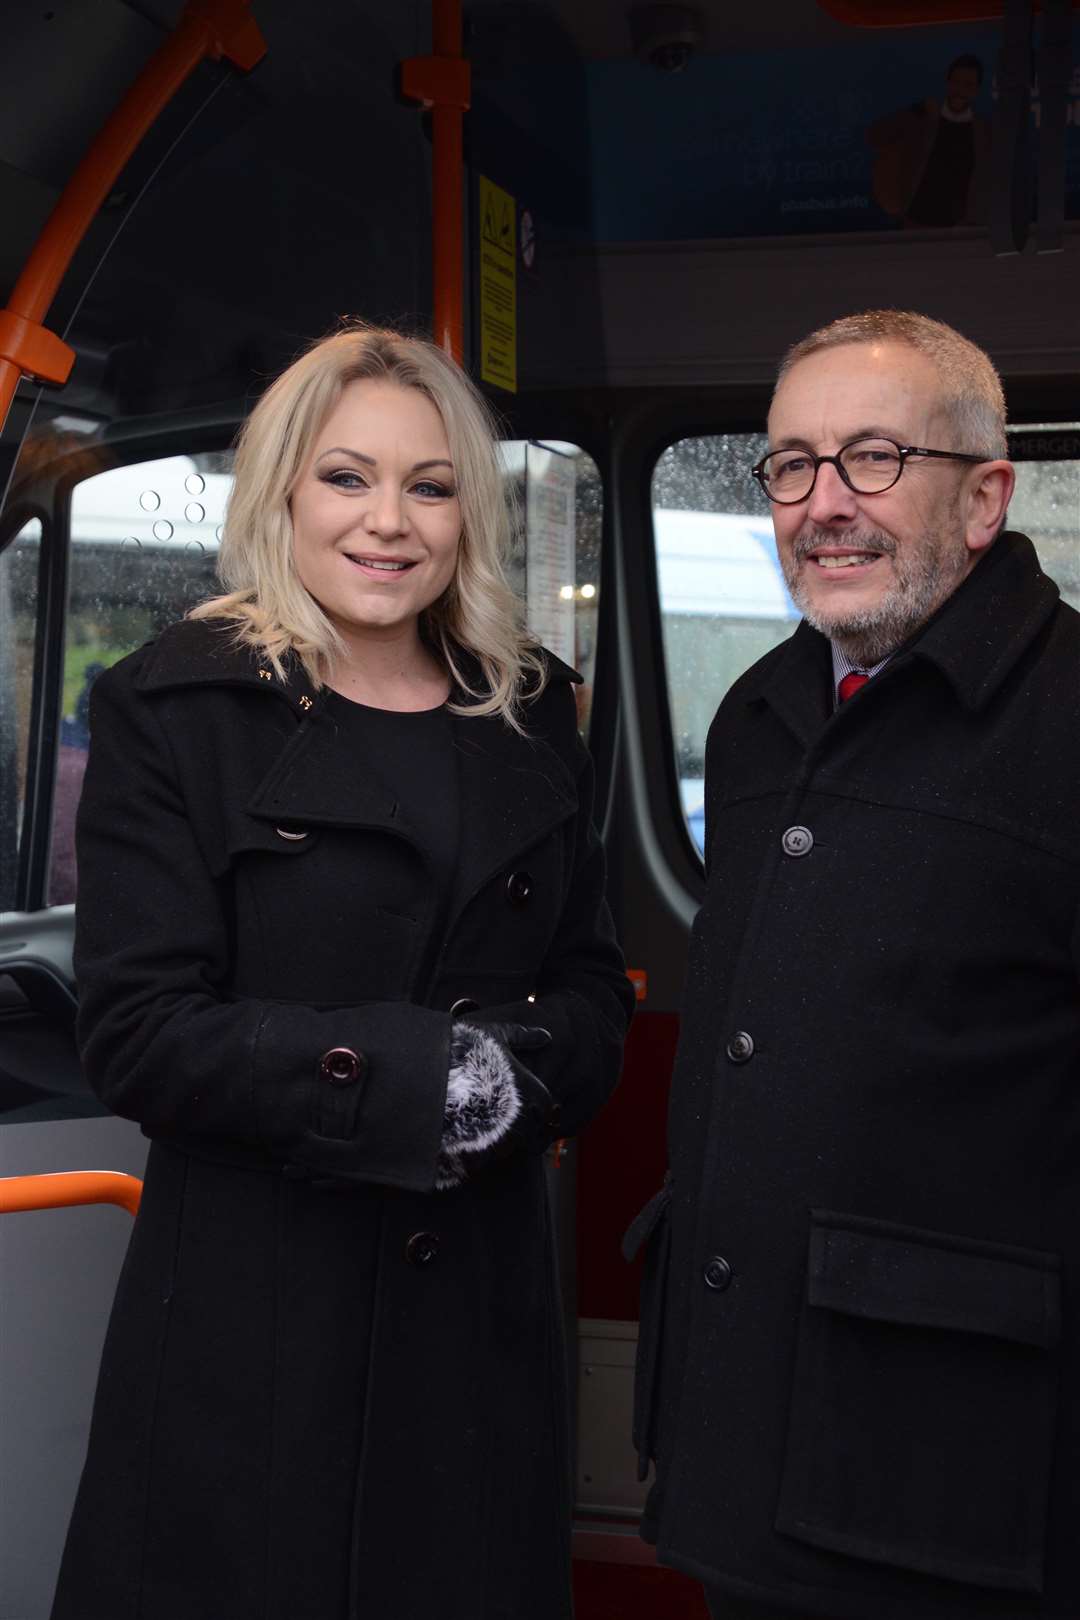 Rita Simons 'Roxy' from Eastenders with MD of Stagecoach South East Philip Norwell Launch of the 'Little and Often' Stagecoach minibus service around Ashford